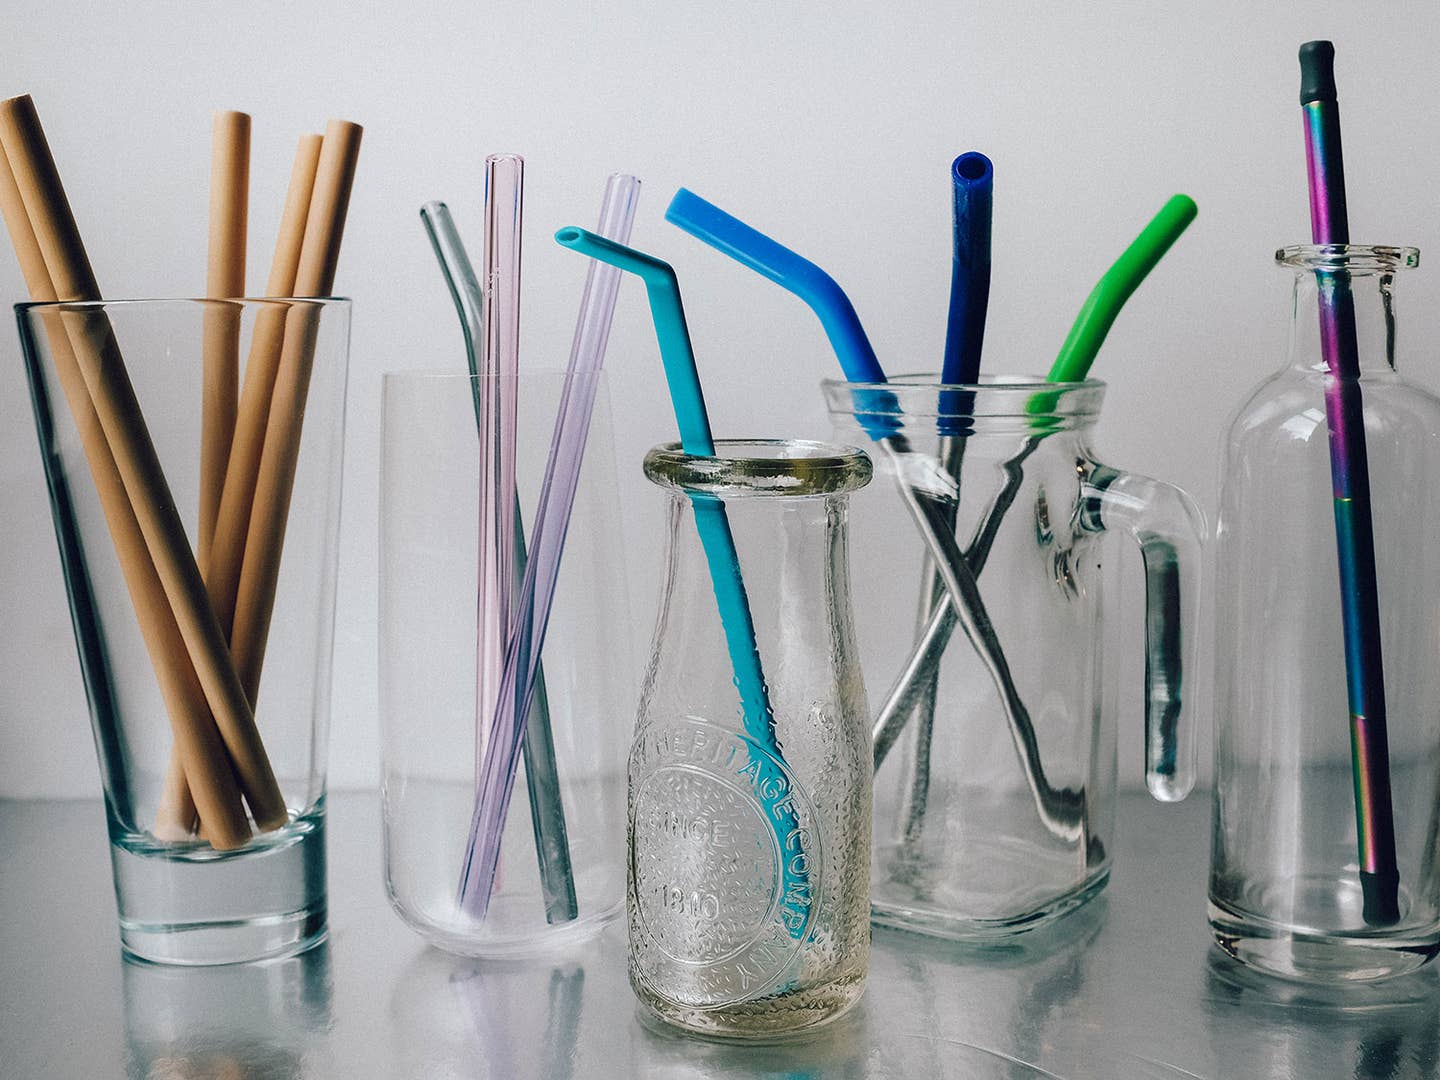 The Best Reusable Straws